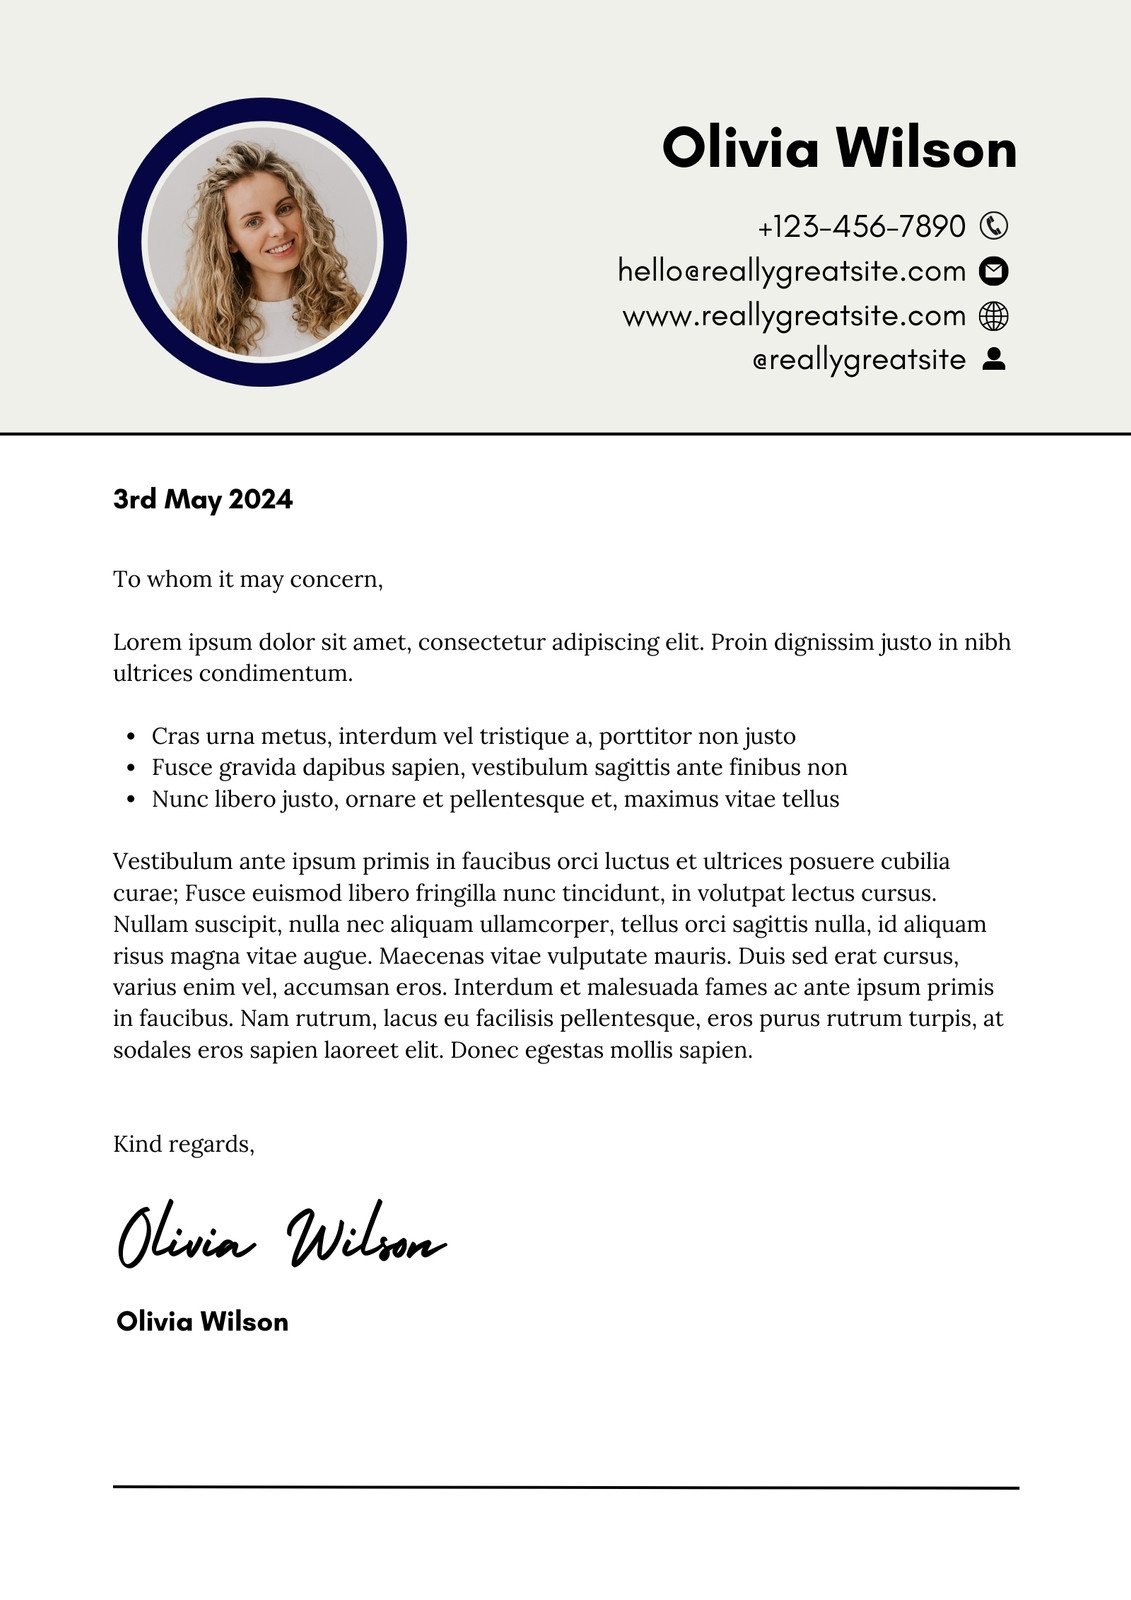 Canva Grey Corporate Professional Cover Letter YJ7fURyKH6Y 